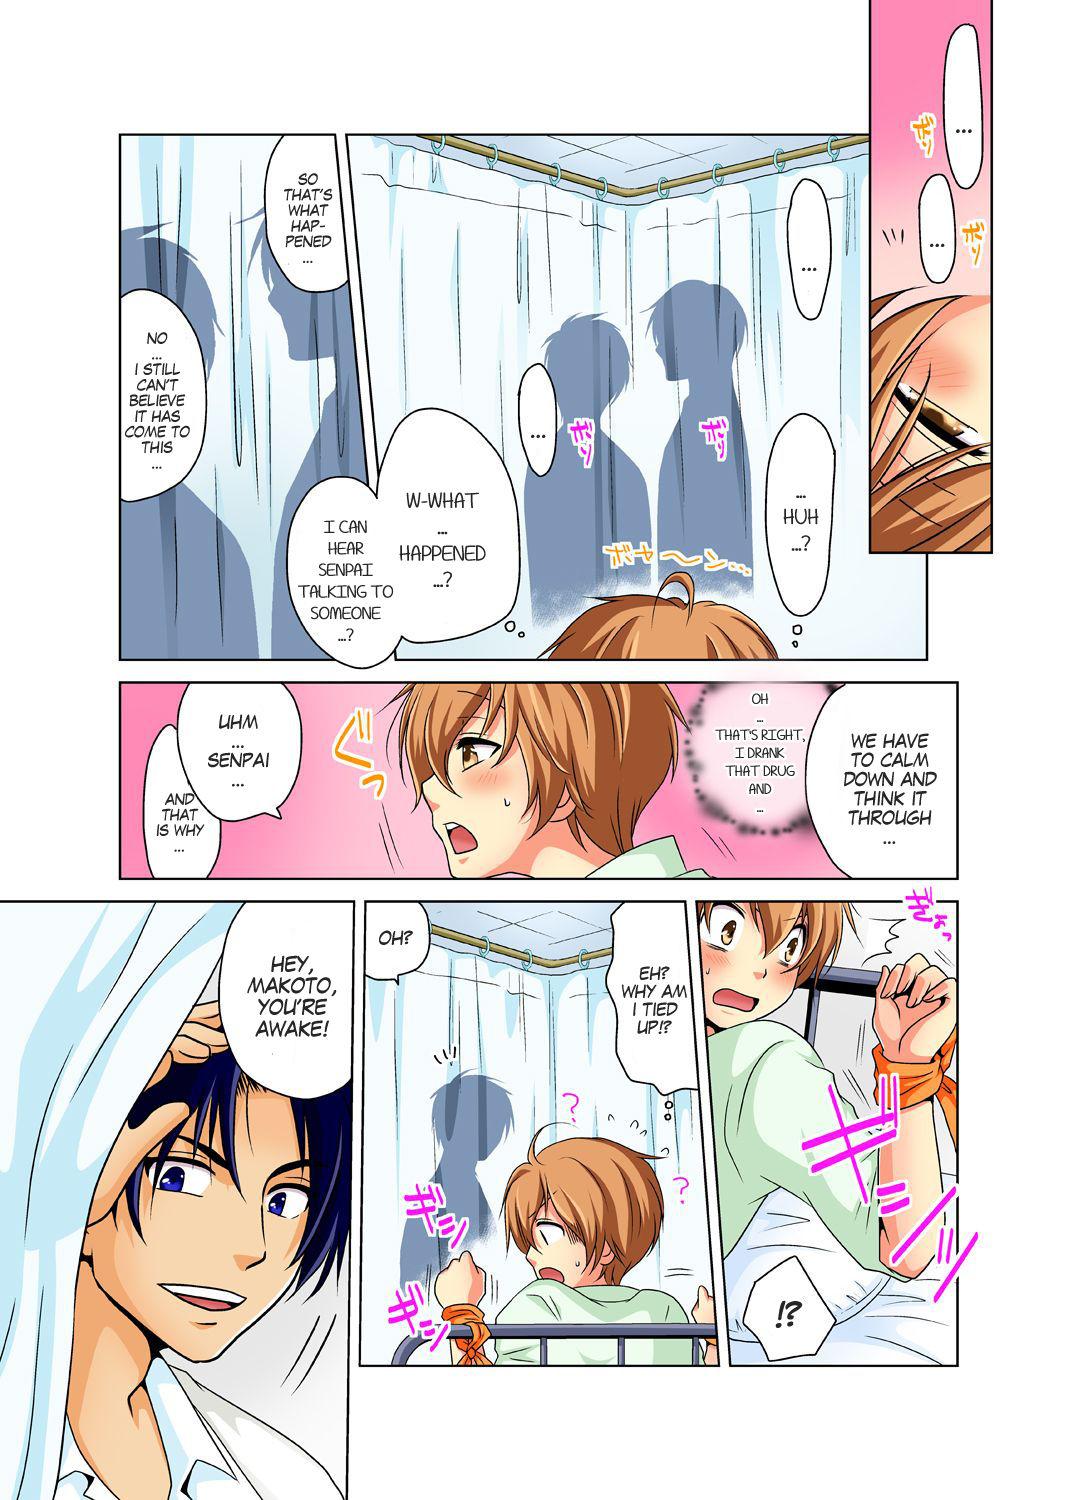 Old Man Nyotaika de Ecchi Kenshin!? Mirudake tte Itta no ni... 1 | Gender Bender Into Sexy Medical Examination! You said that you were only going to look... 1 Best - Page 5